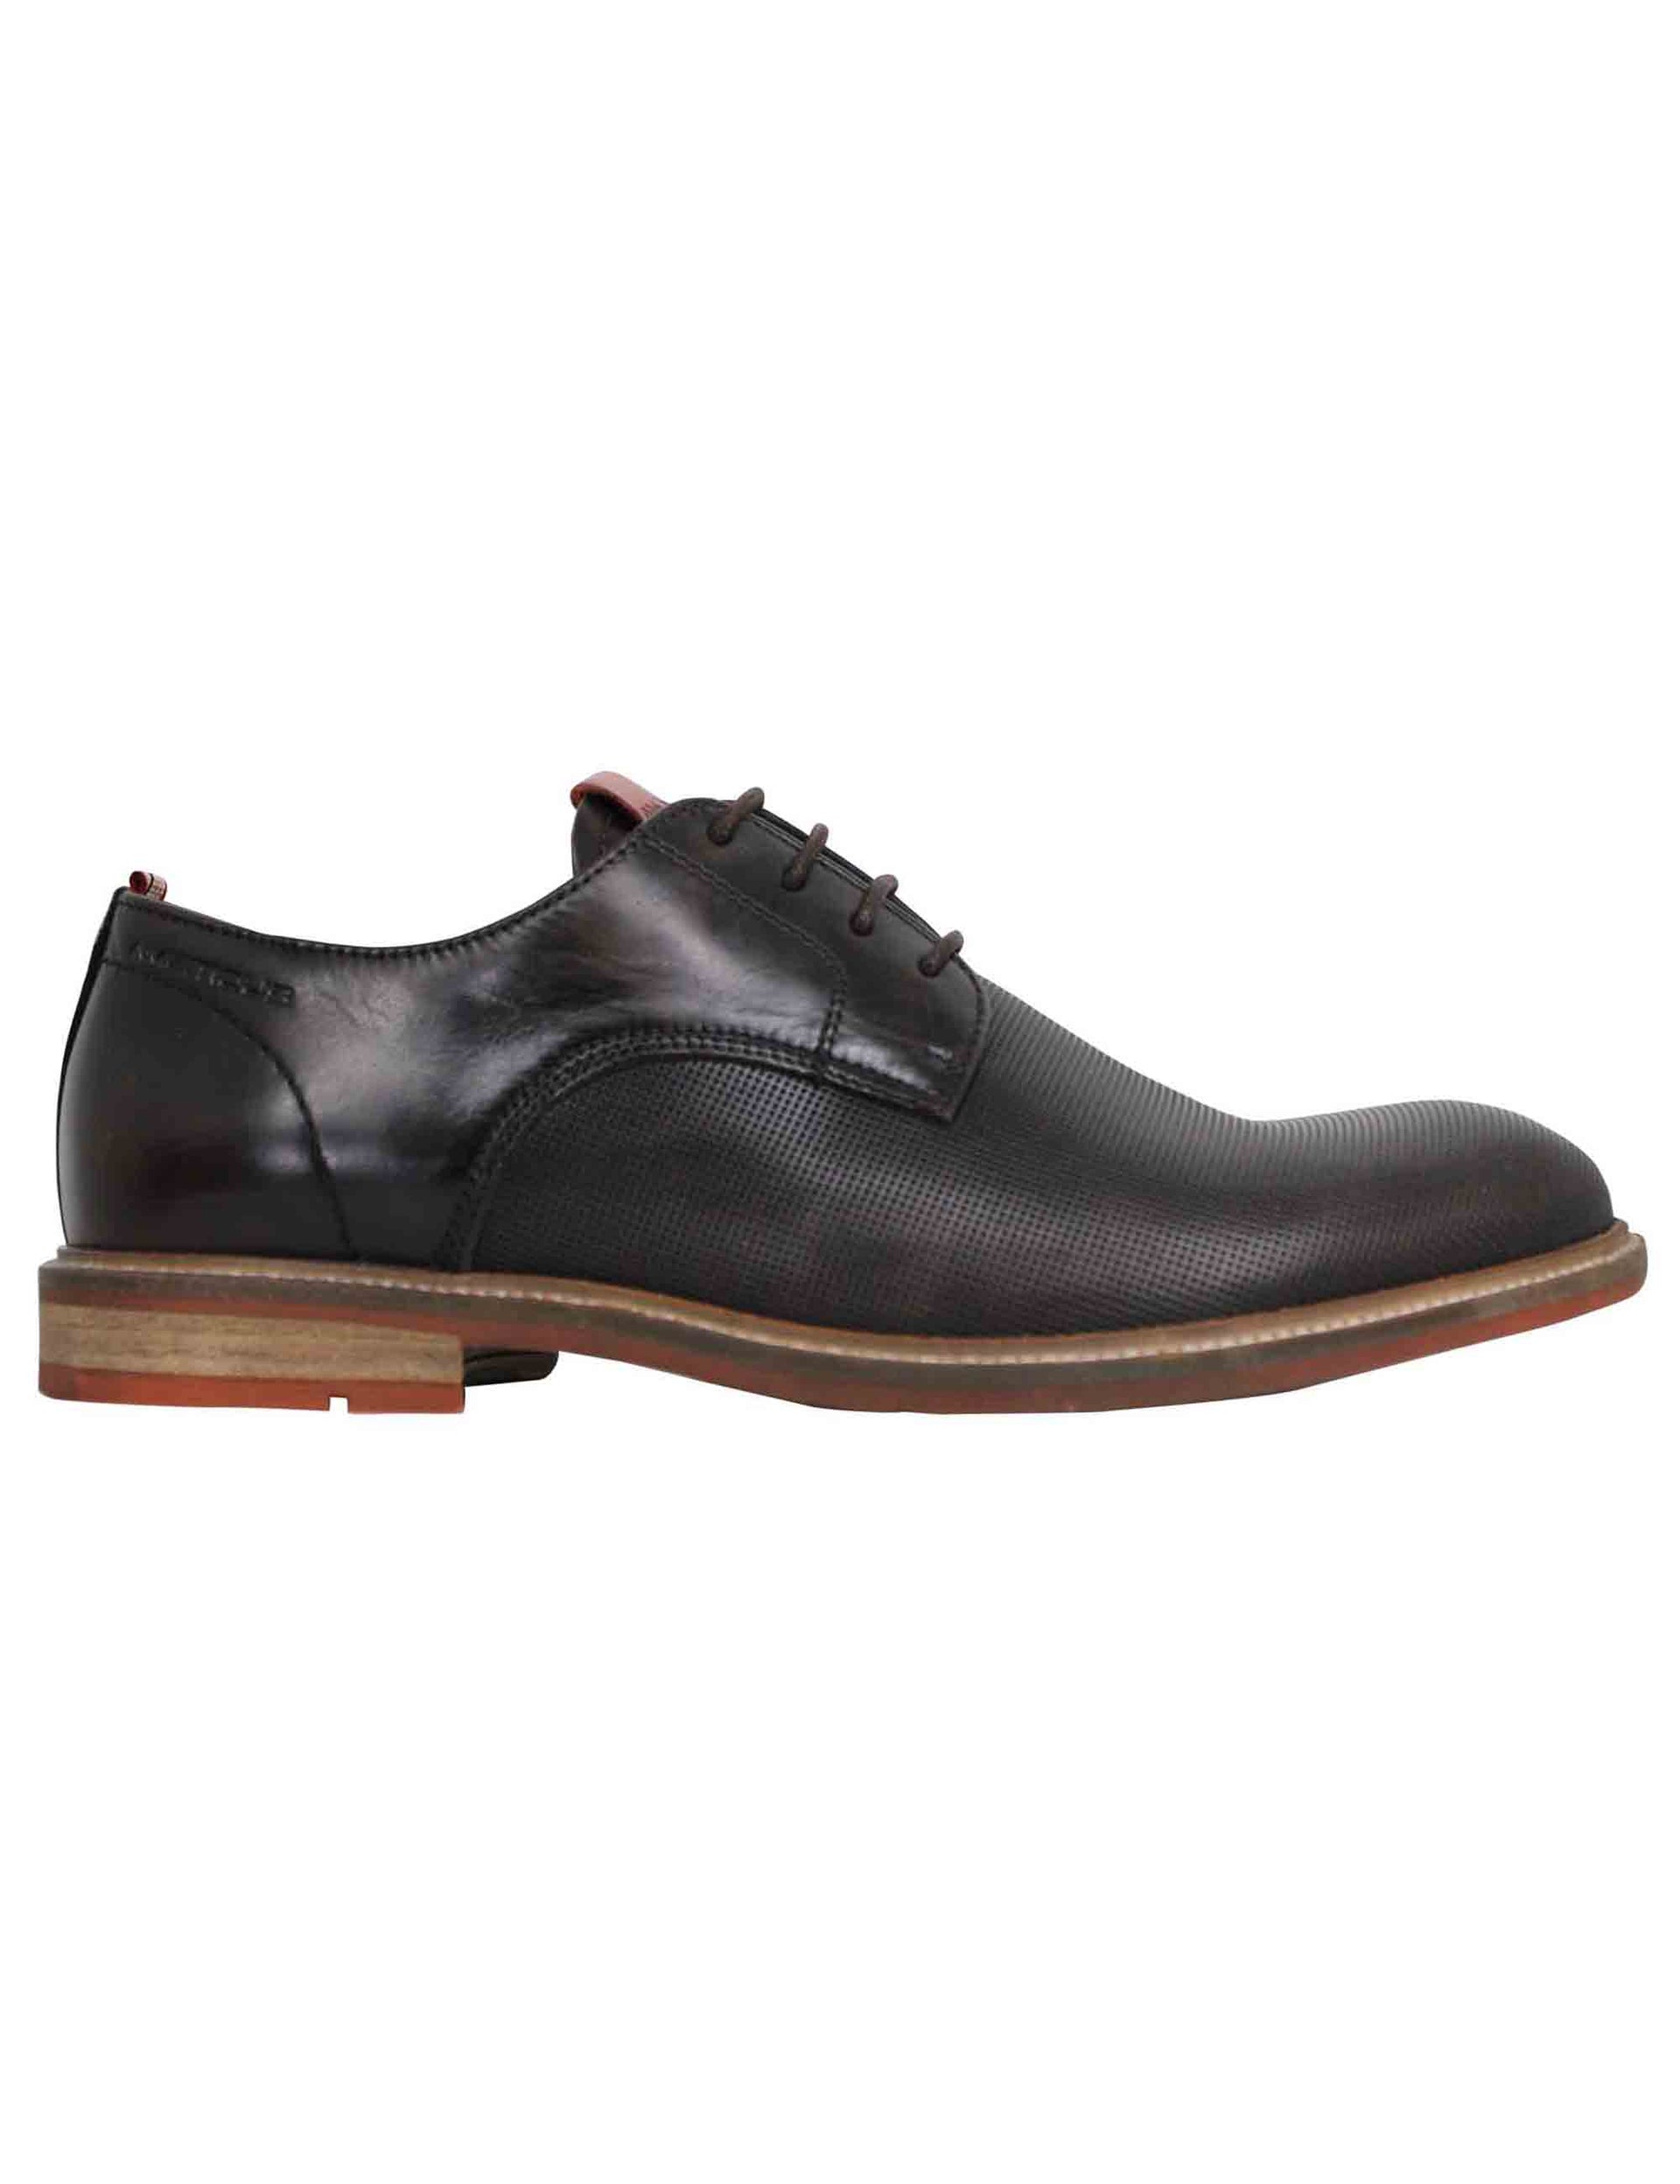 Caye men's lace-ups in brown leather with rubber sole